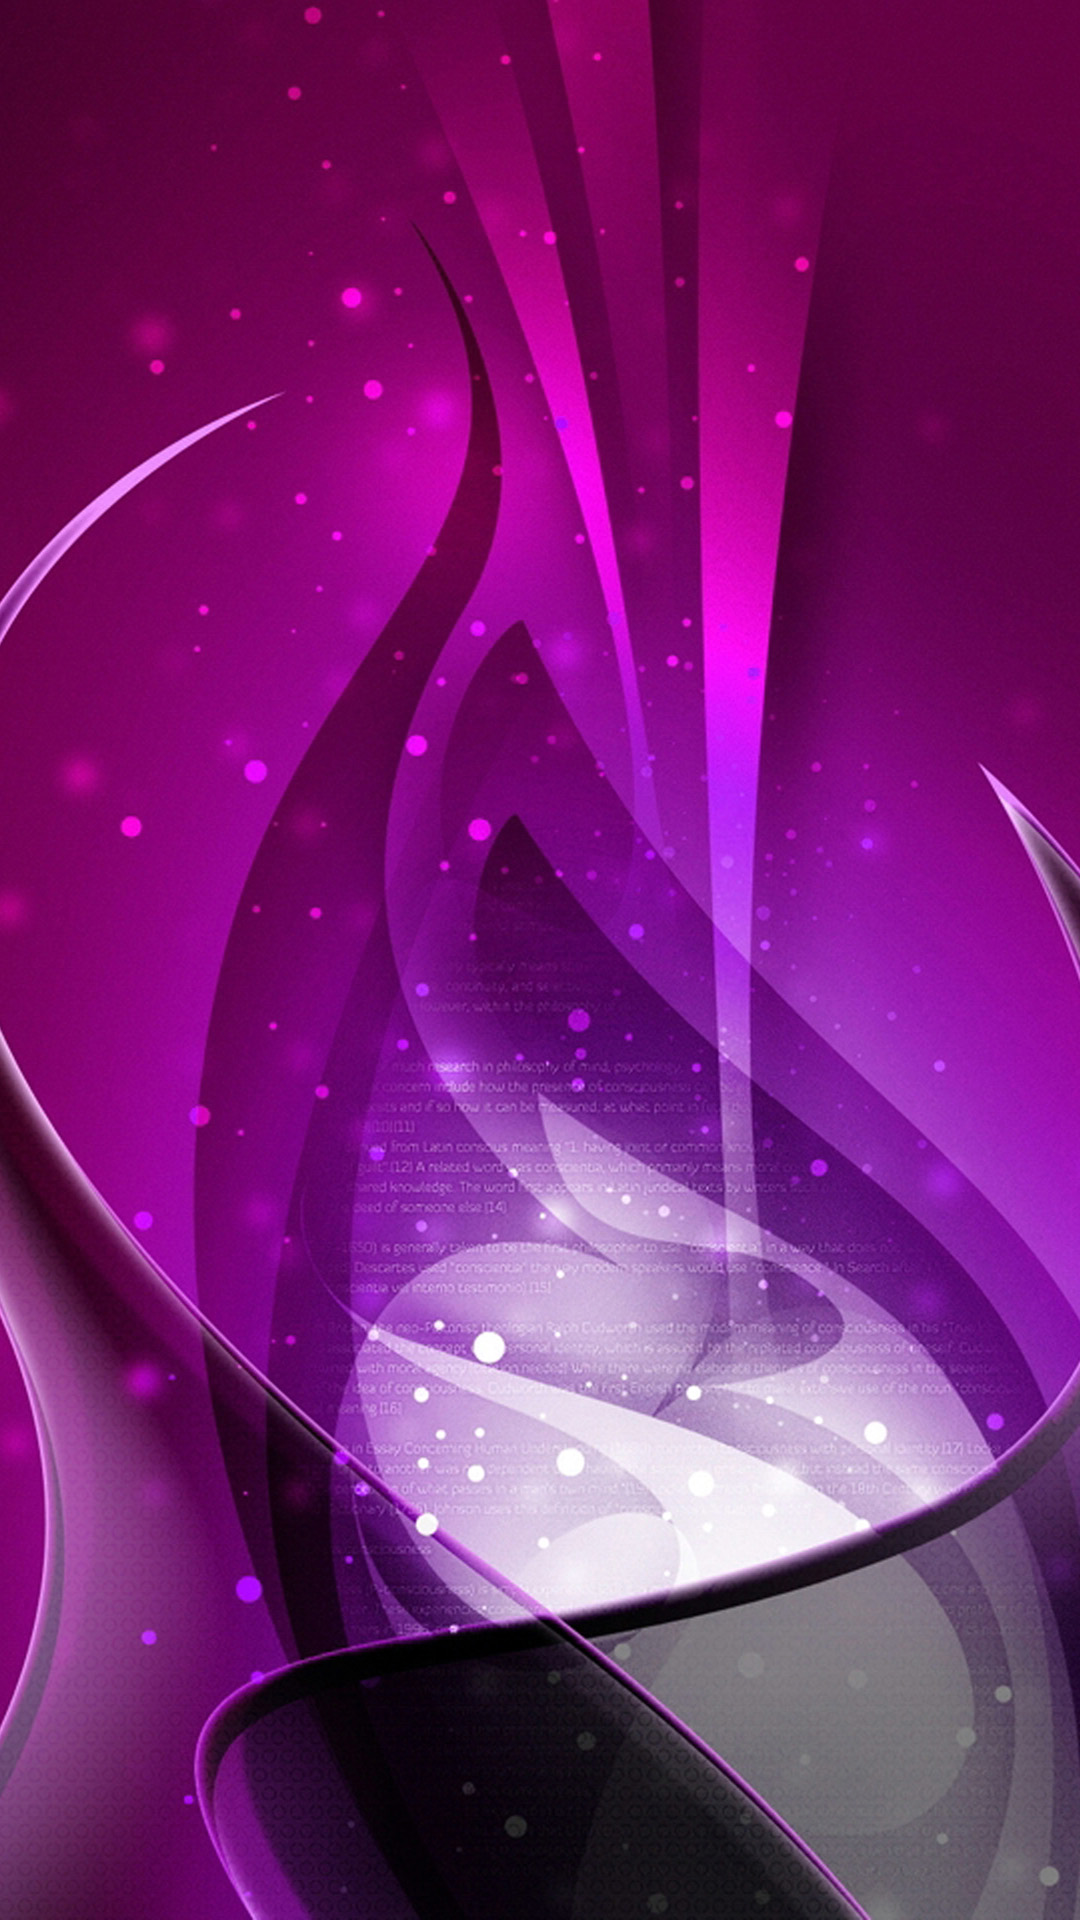 Iphone Wallpaper Abstract Hd Purple